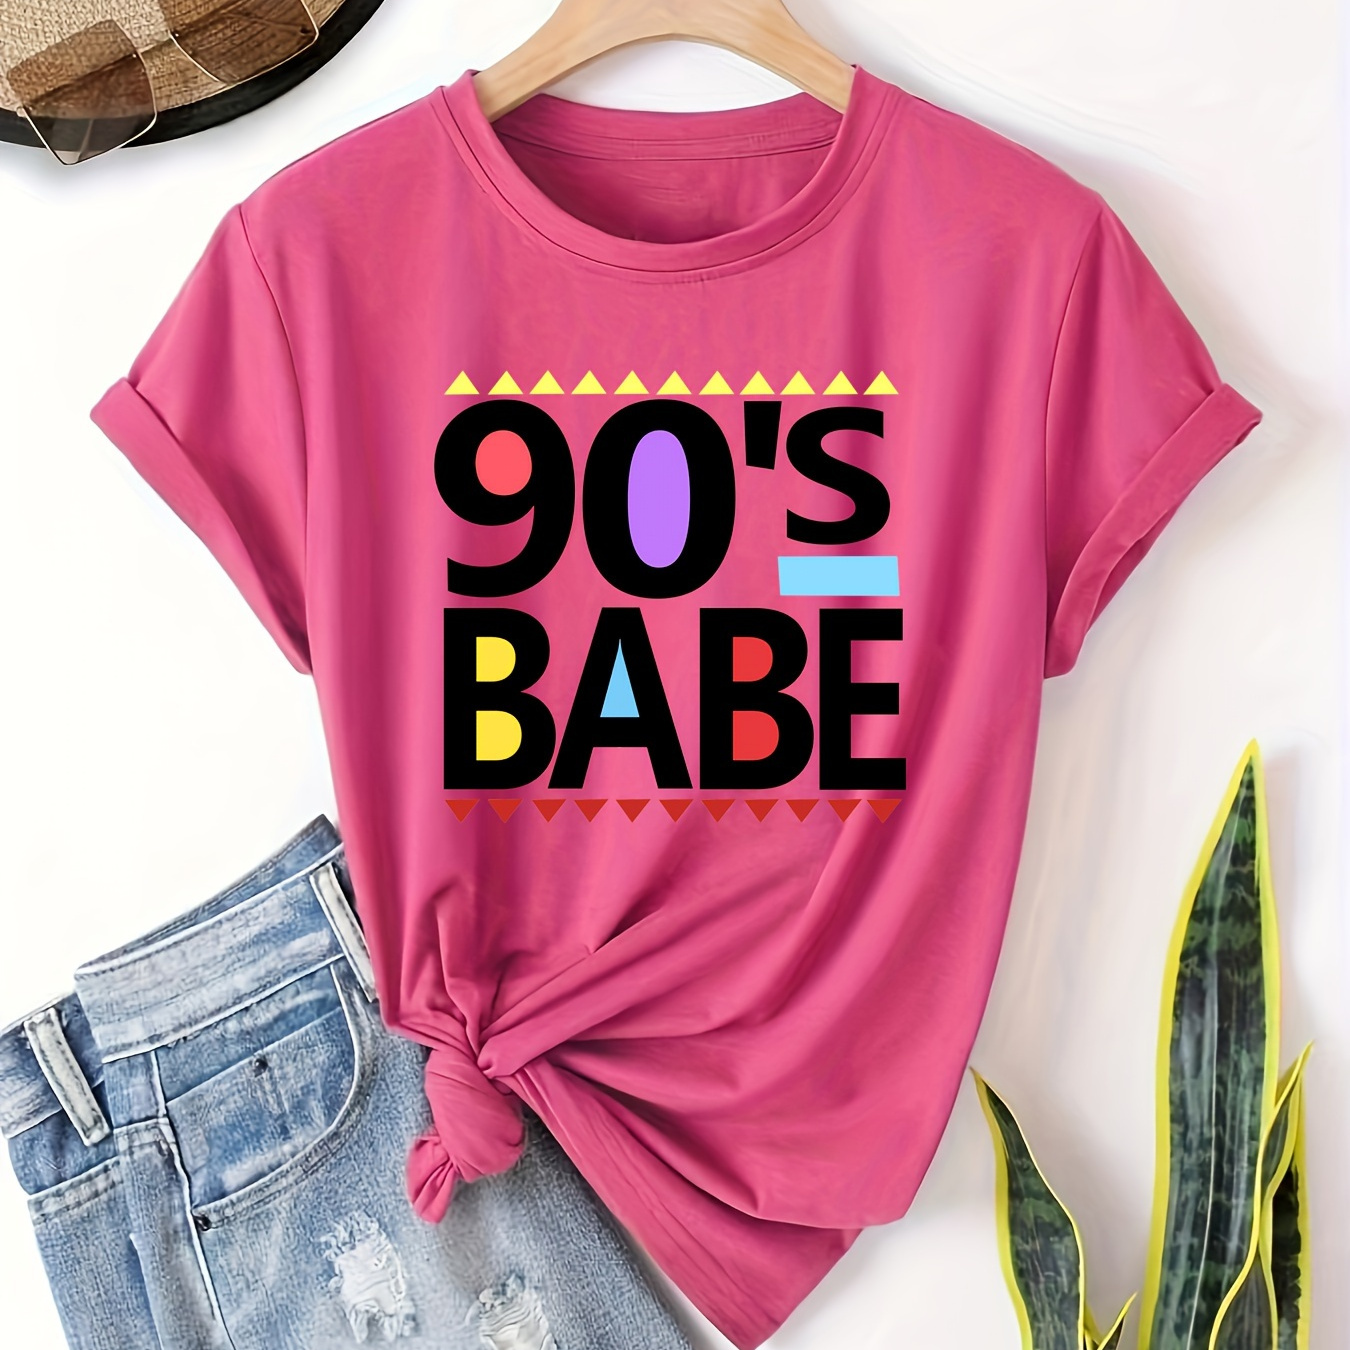 

90's Babe Print T-shirt, Casual Short Sleeve Crew Neck Top For Spring & Summer, Women's Clothing